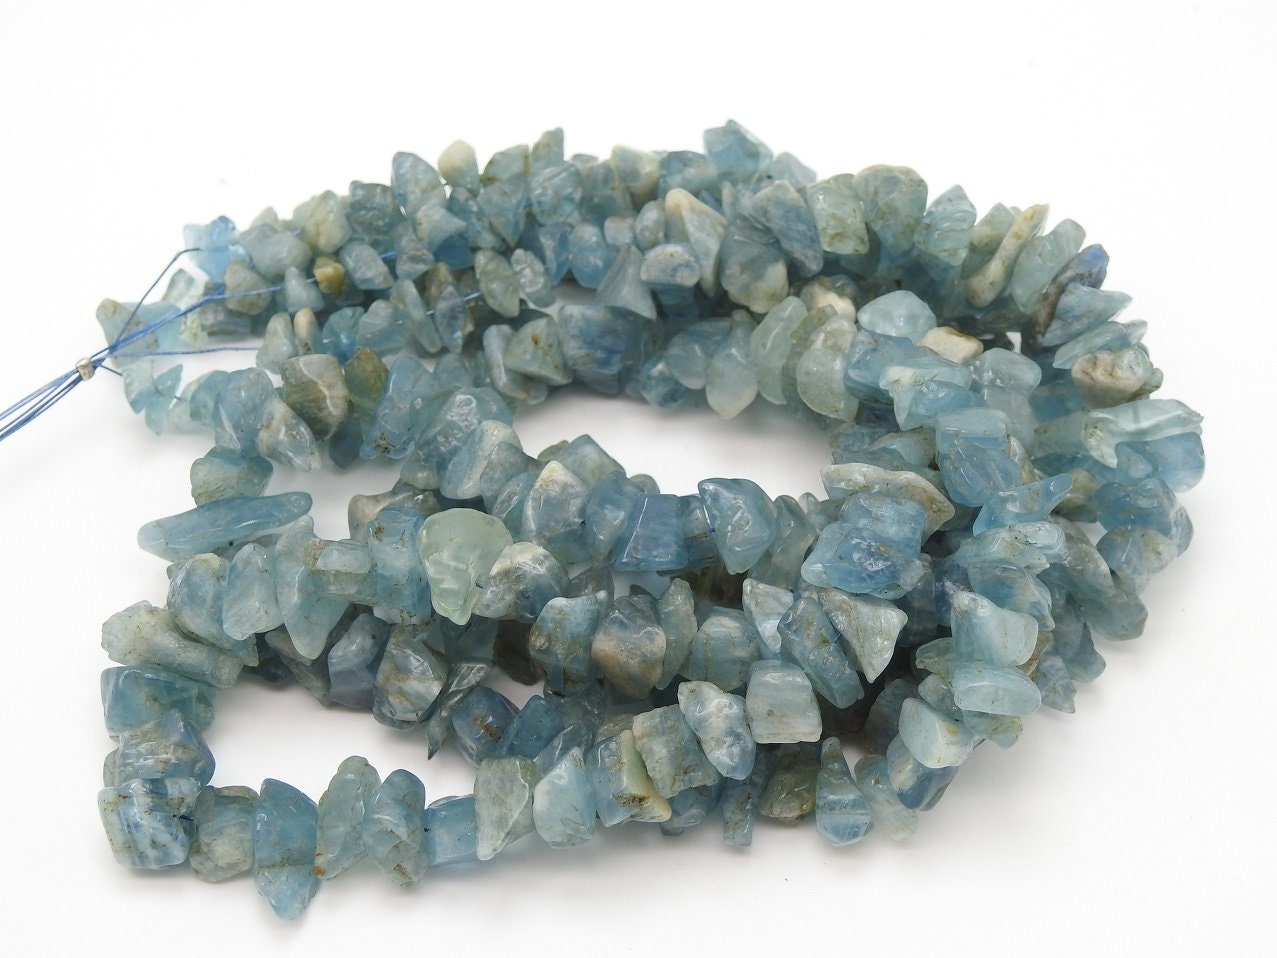 Aquamarine Polished Rough Bead,Uncut,Chip,Anklets,16Inch 18X12To8X5MM Approx,Wholesaler,Supplies,New Arrival,100%Natural PME-RB1 | Save 33% - Rajasthan Living 14